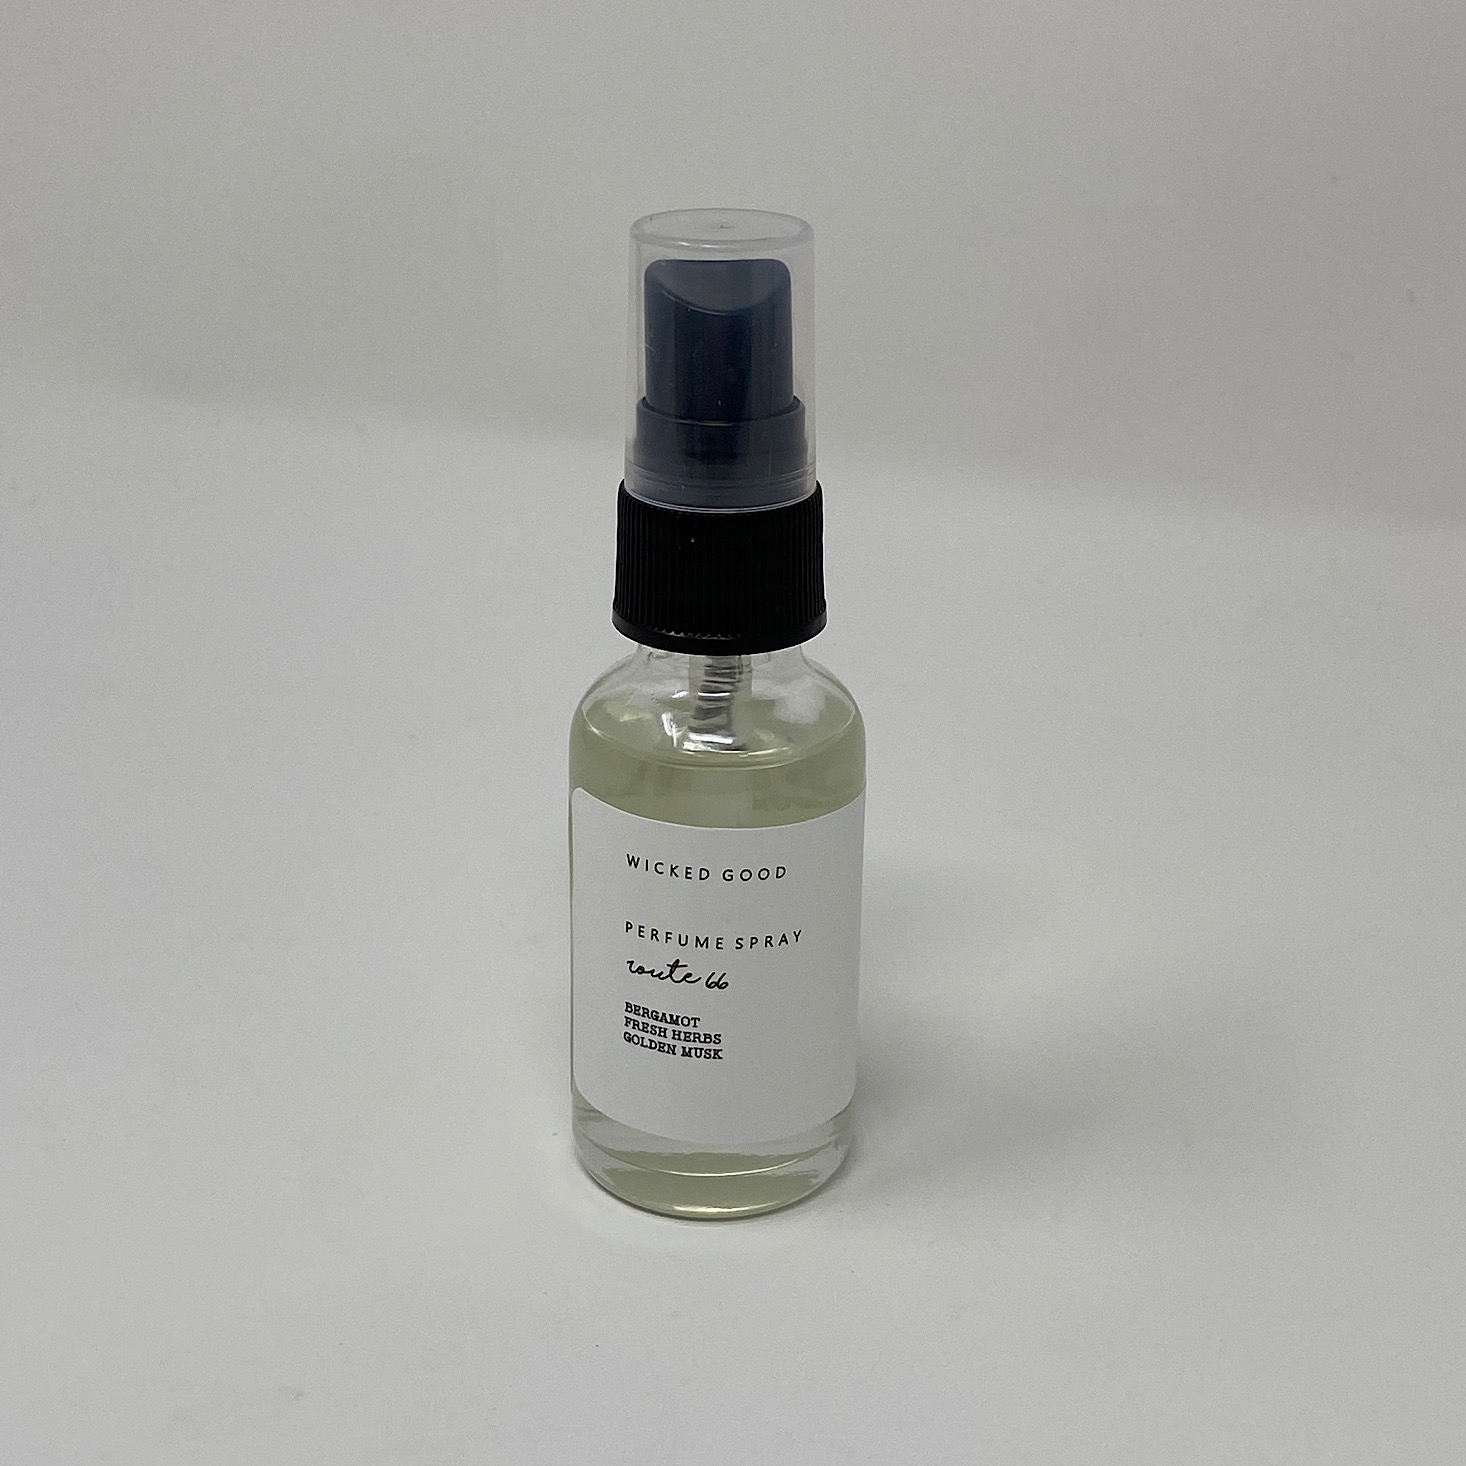 Wicked Good Perfume Review + Coupon - July 2020 | MSA